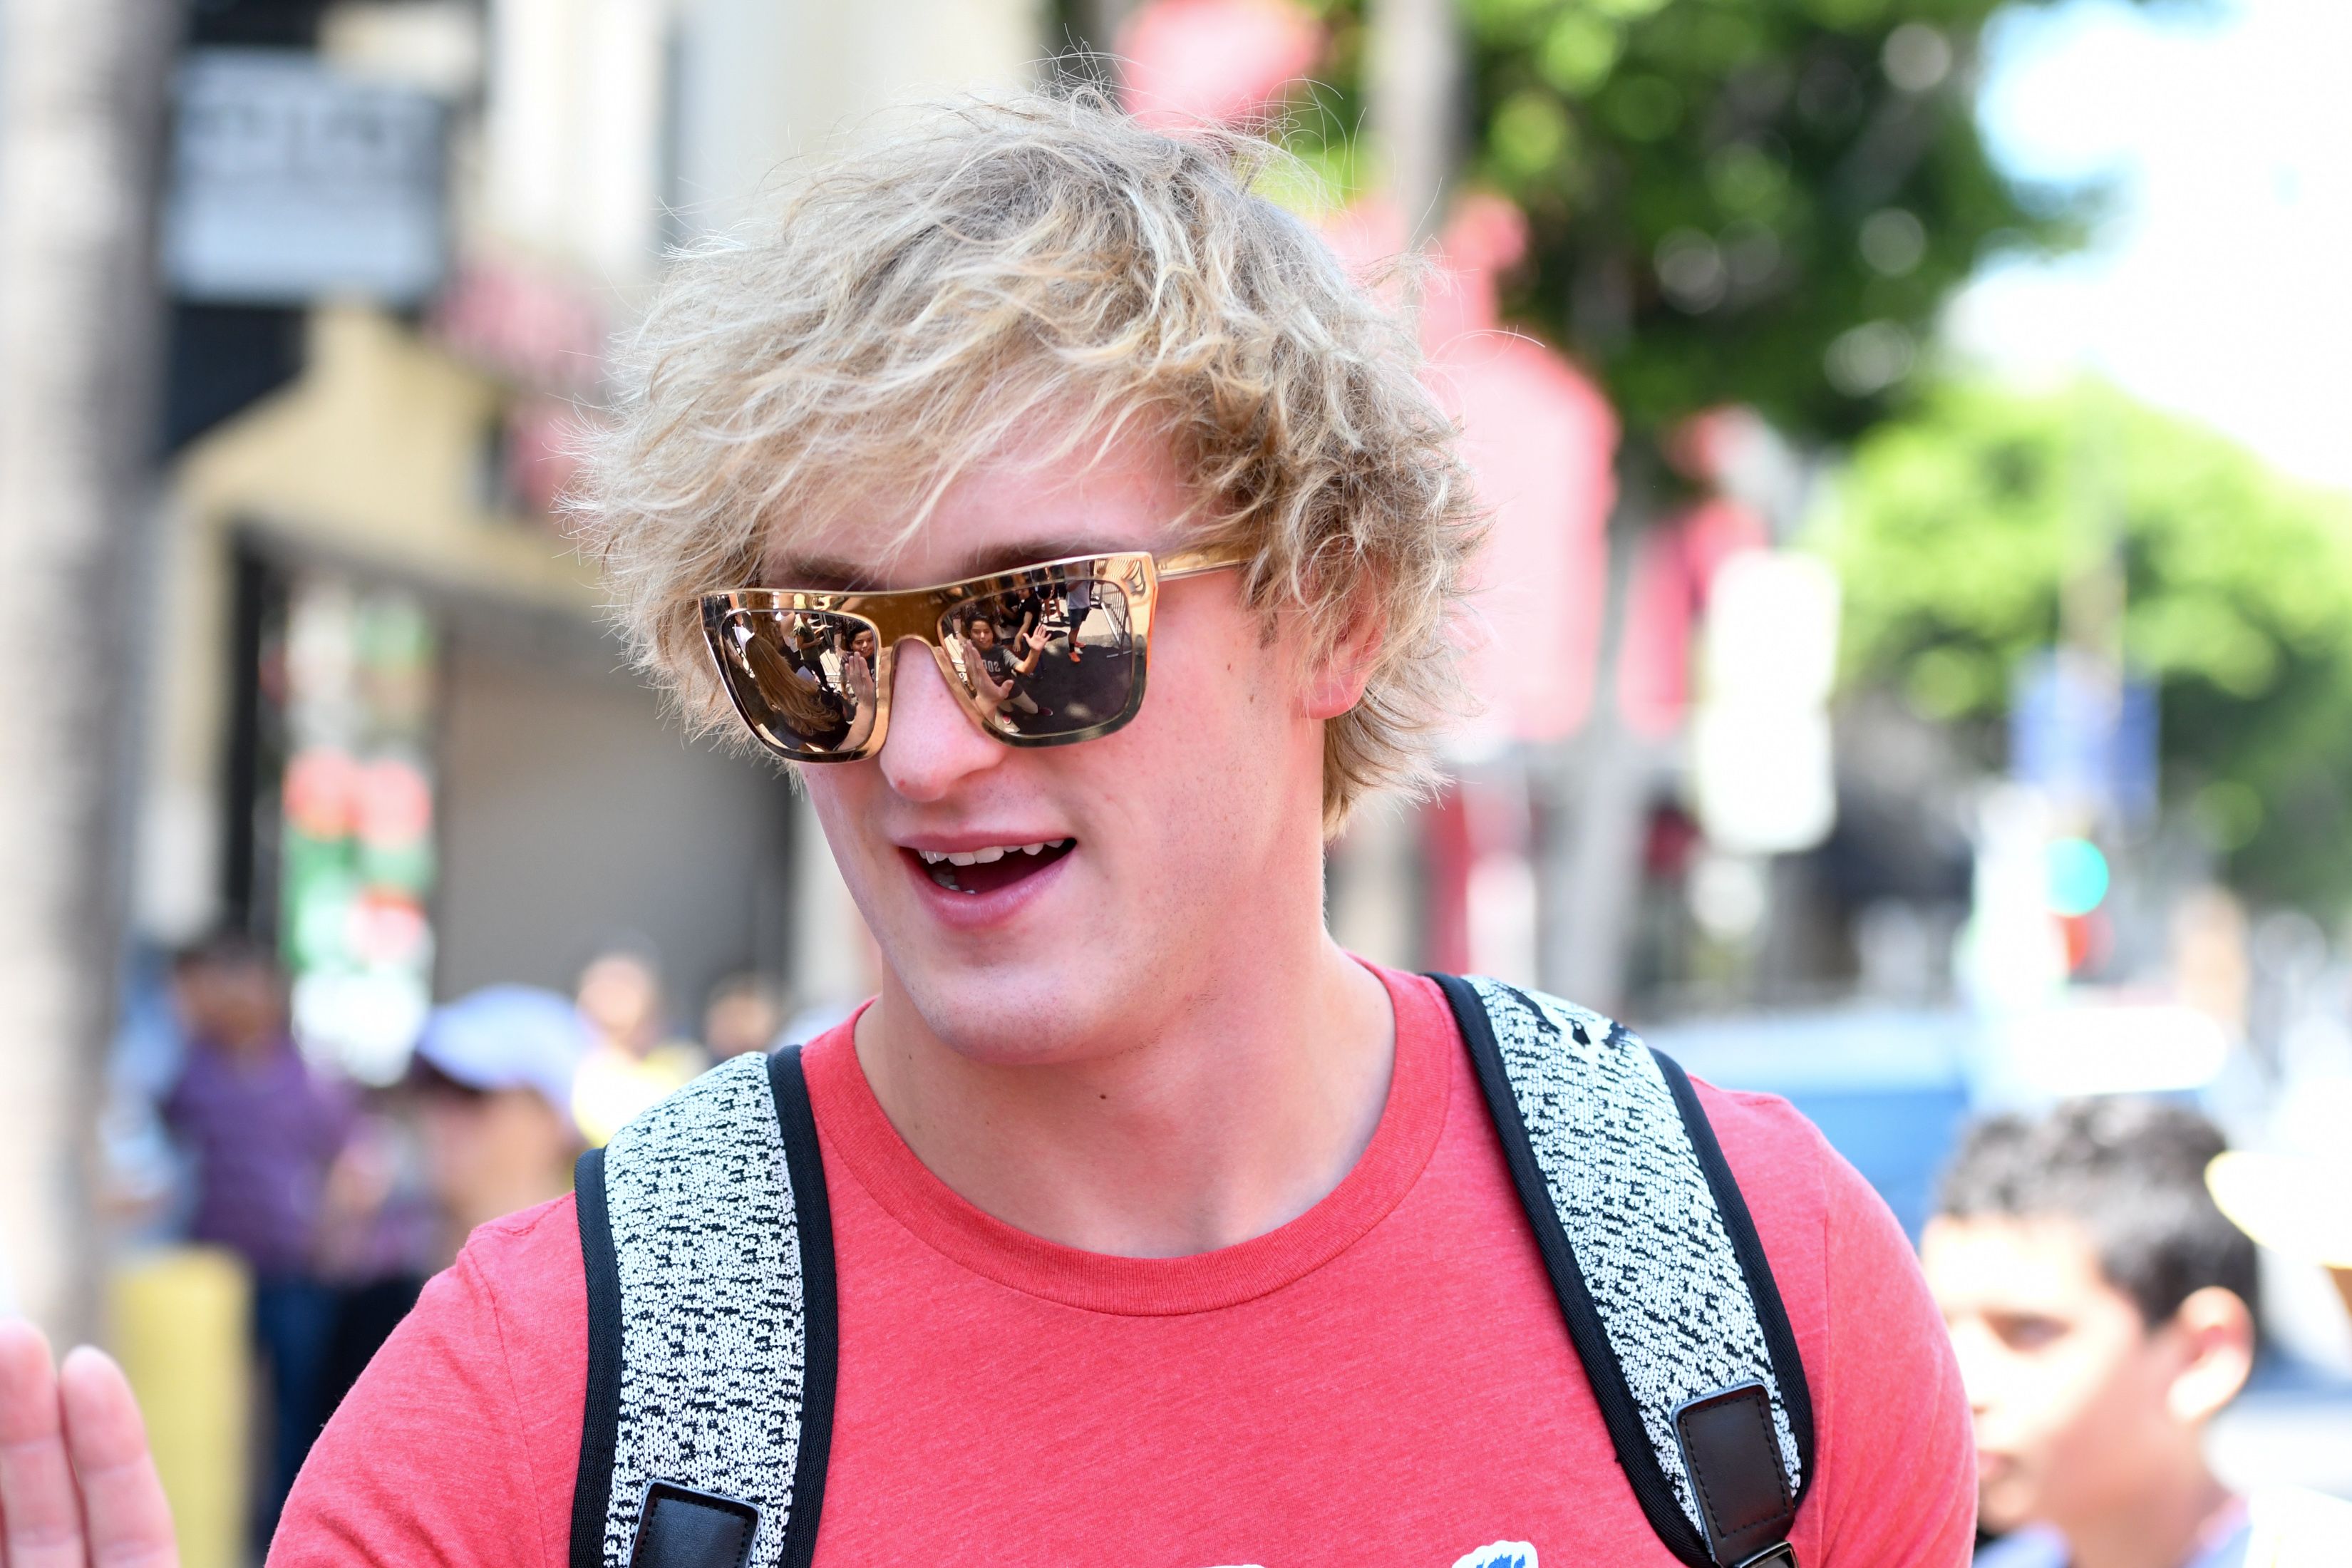 Logan Paul wants to date Kendall Jenner and good luck buddy